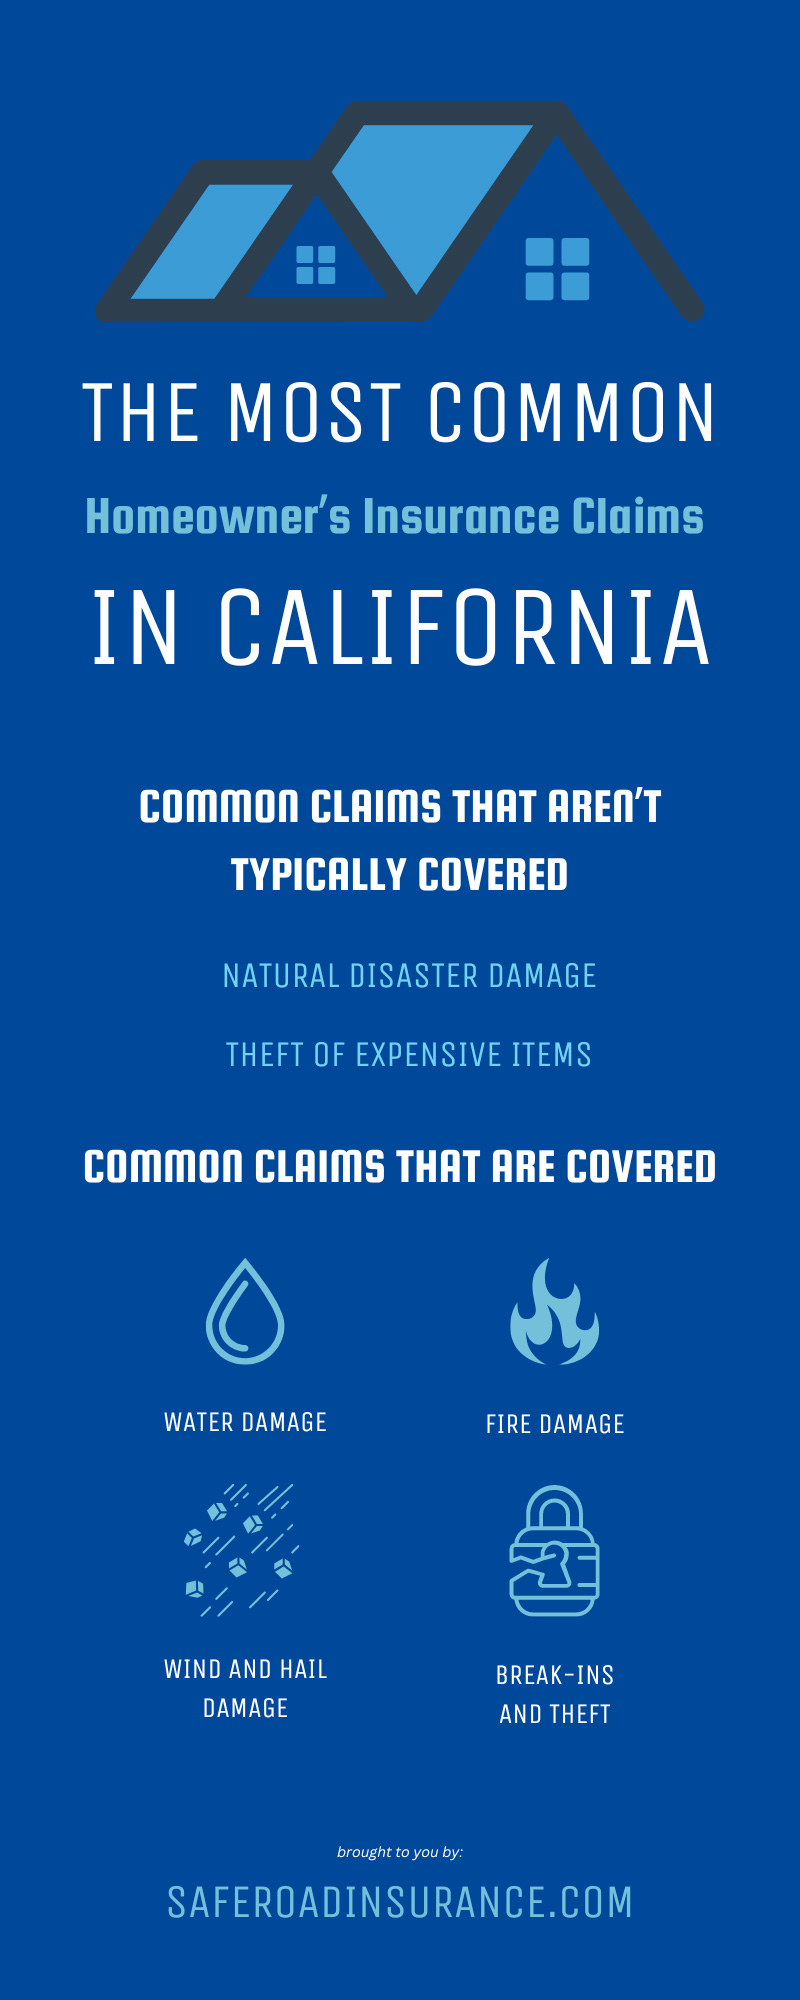 The Most Common Homeowner’s Insurance Claims in California